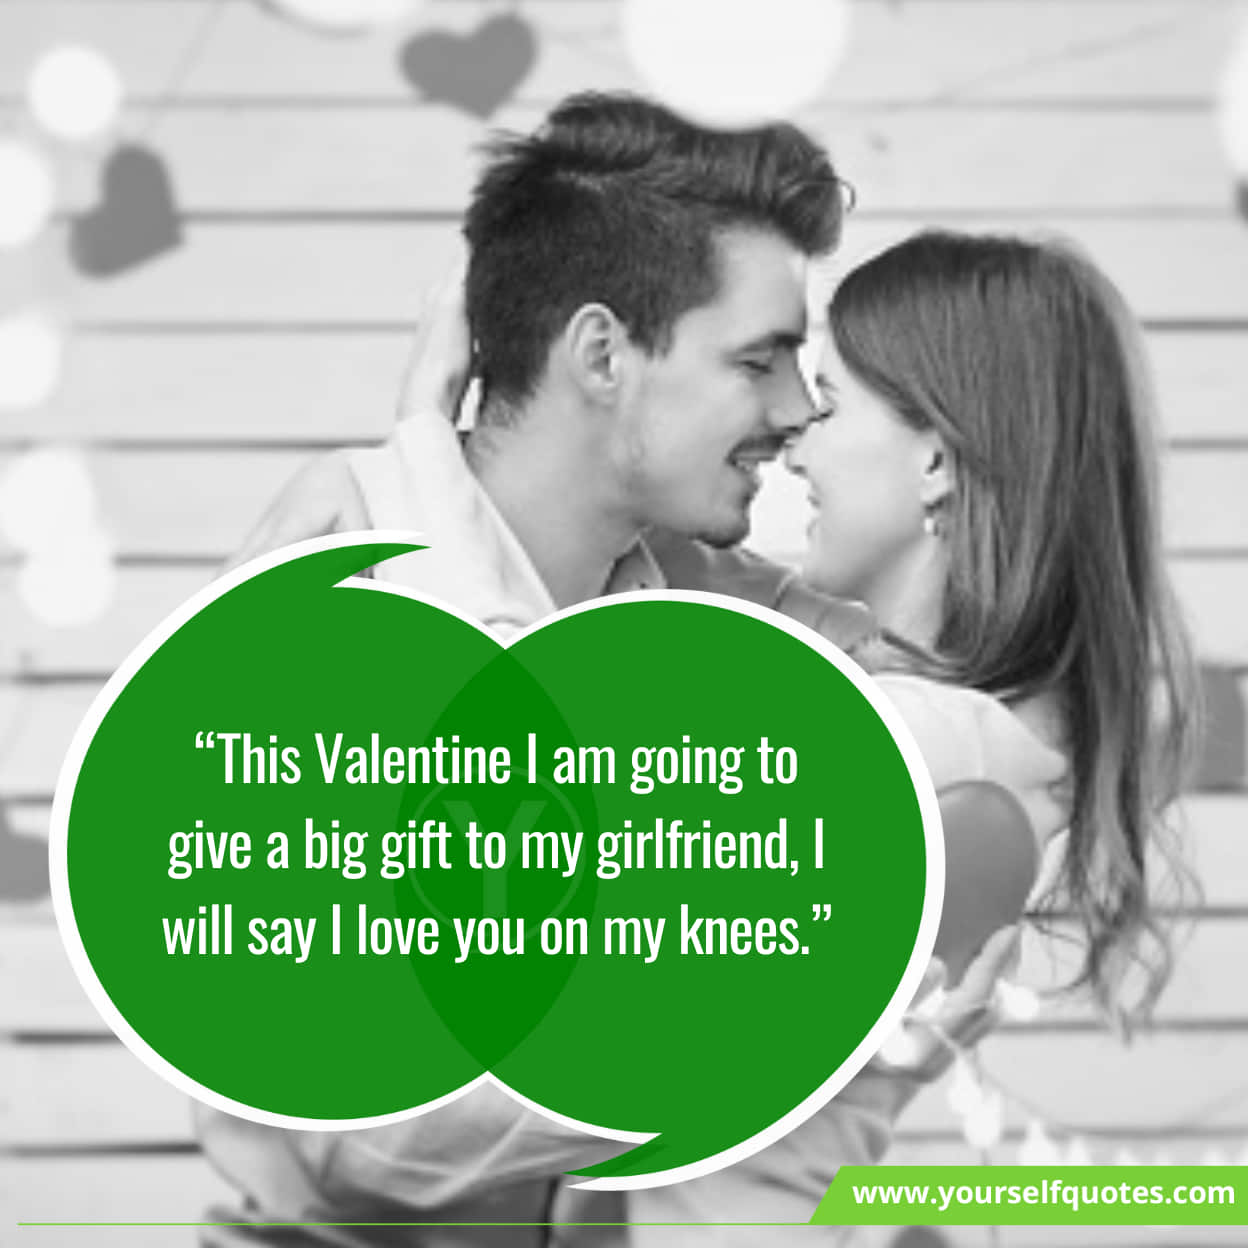 Funny Valentine's Day Quotes for Couples